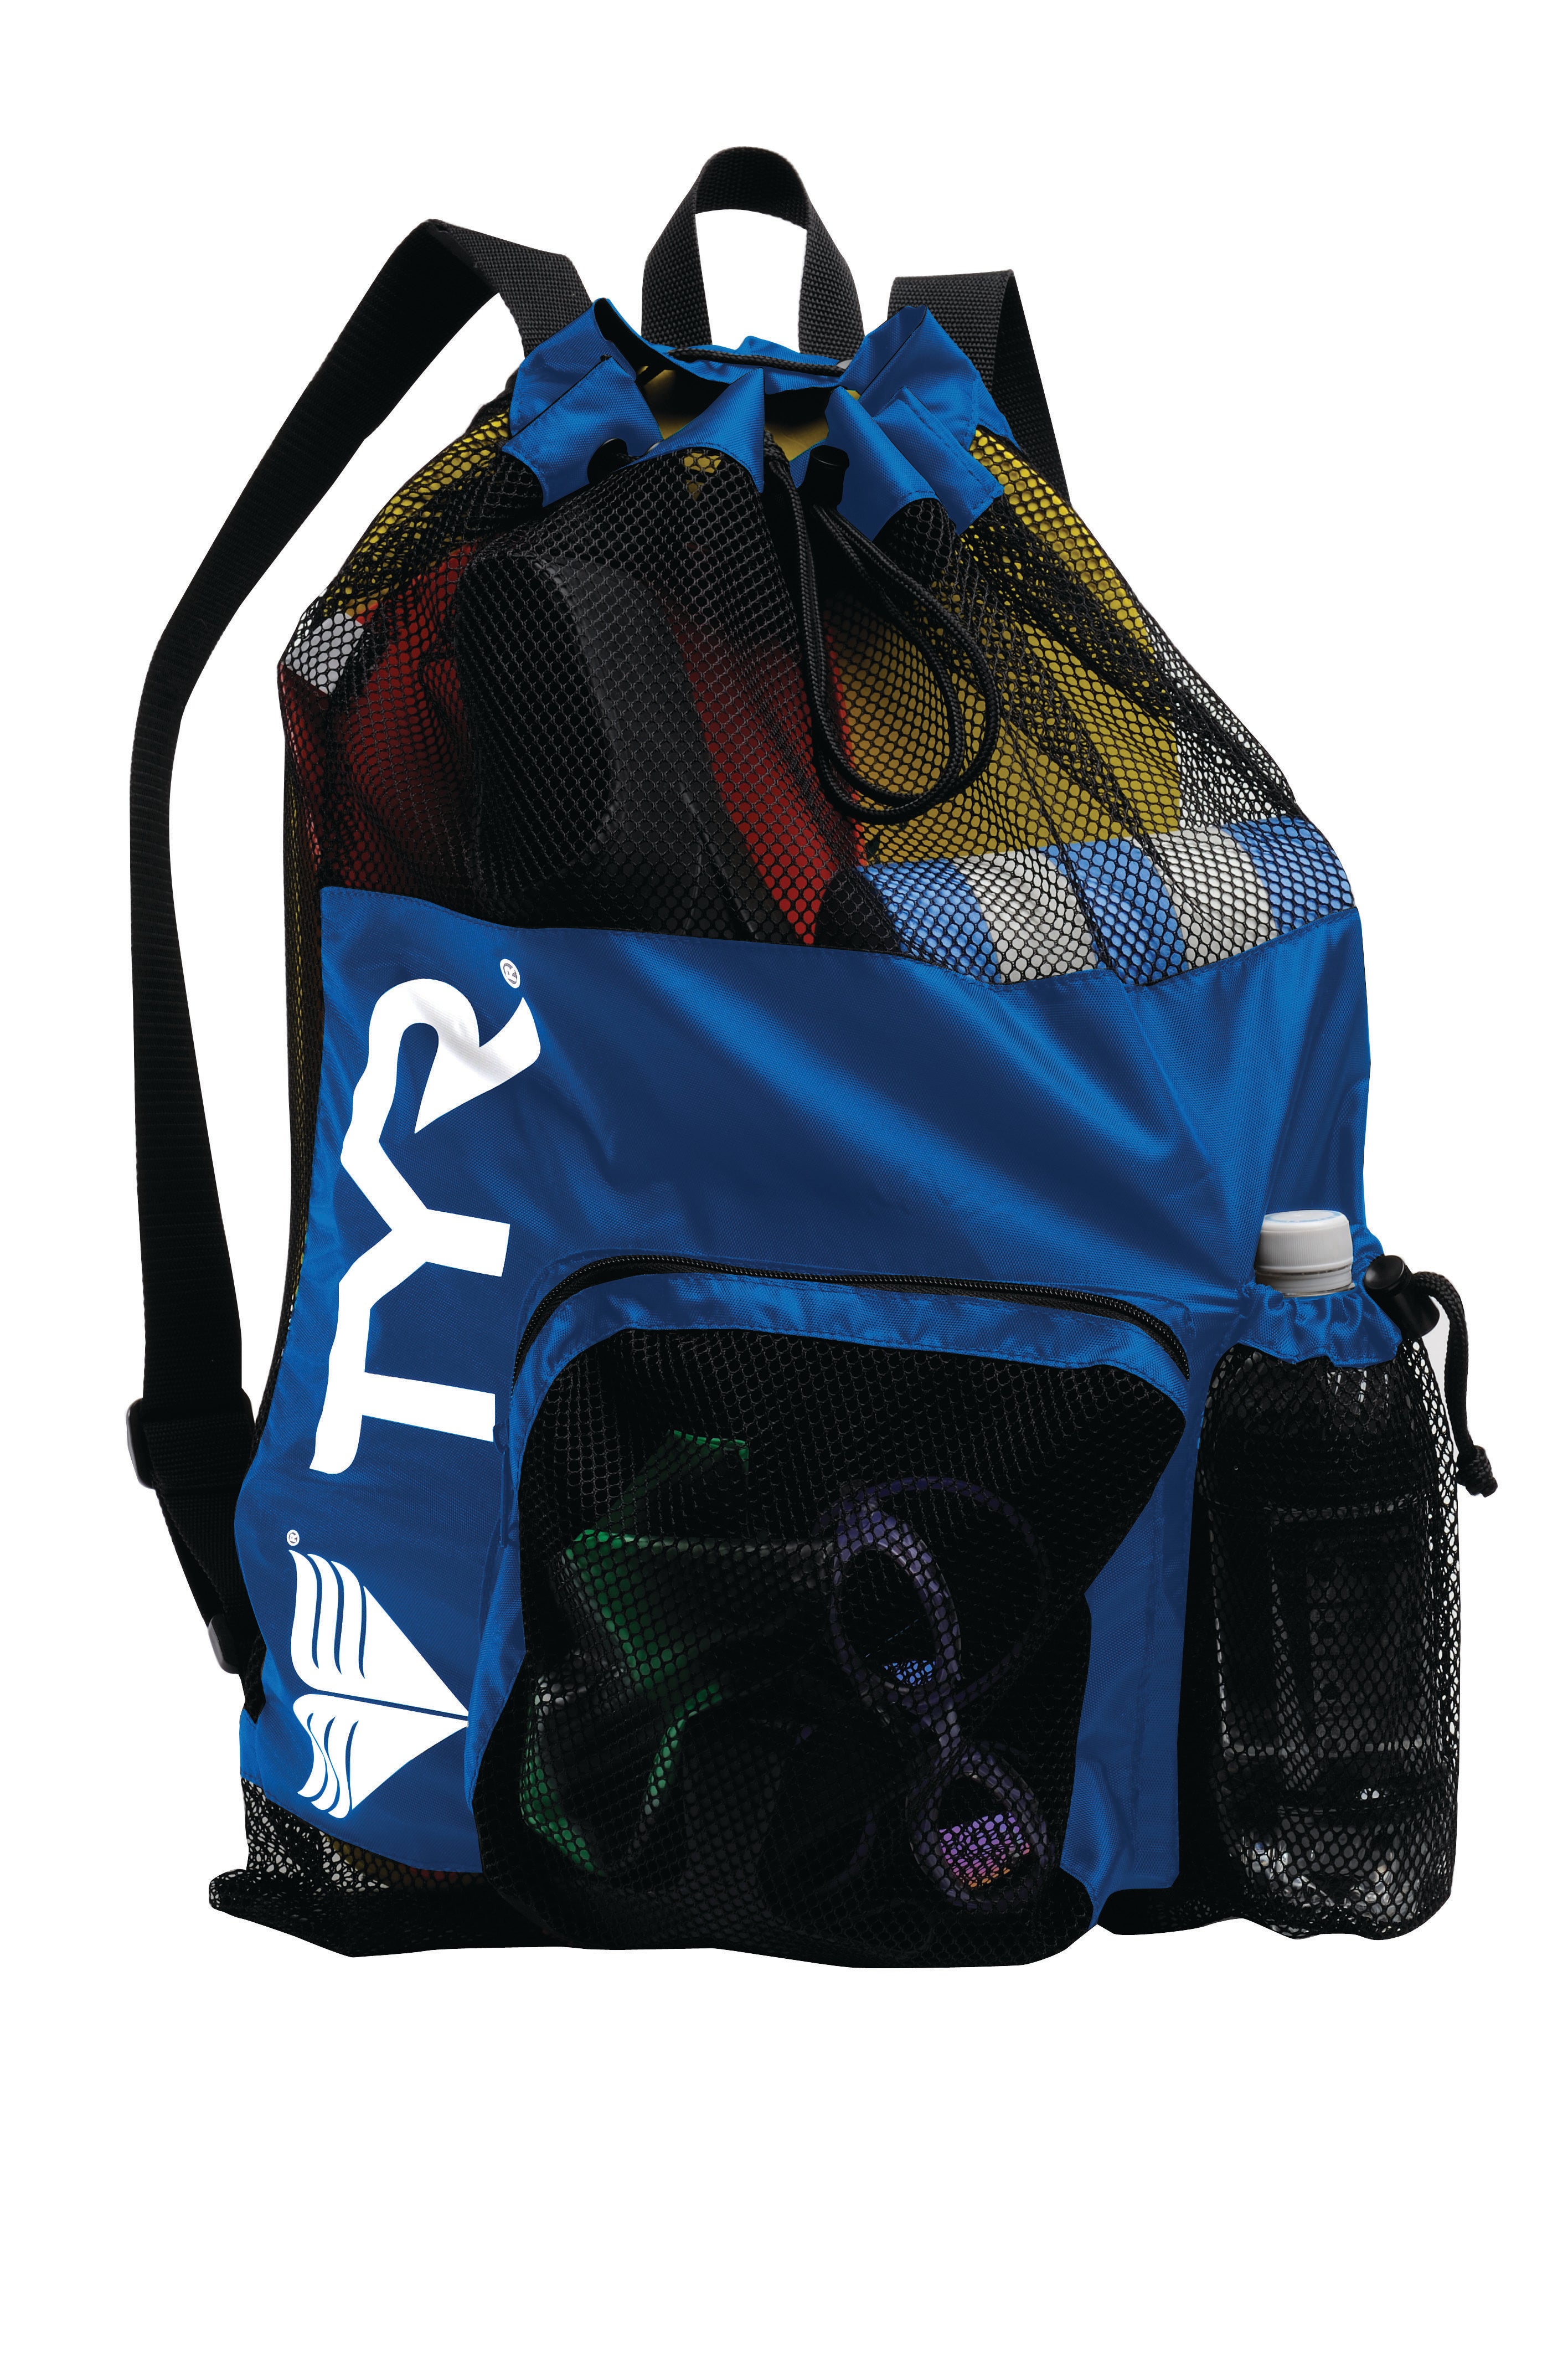 Swimmers World  Swimmers World has TYR Mummy Bags all  Facebook